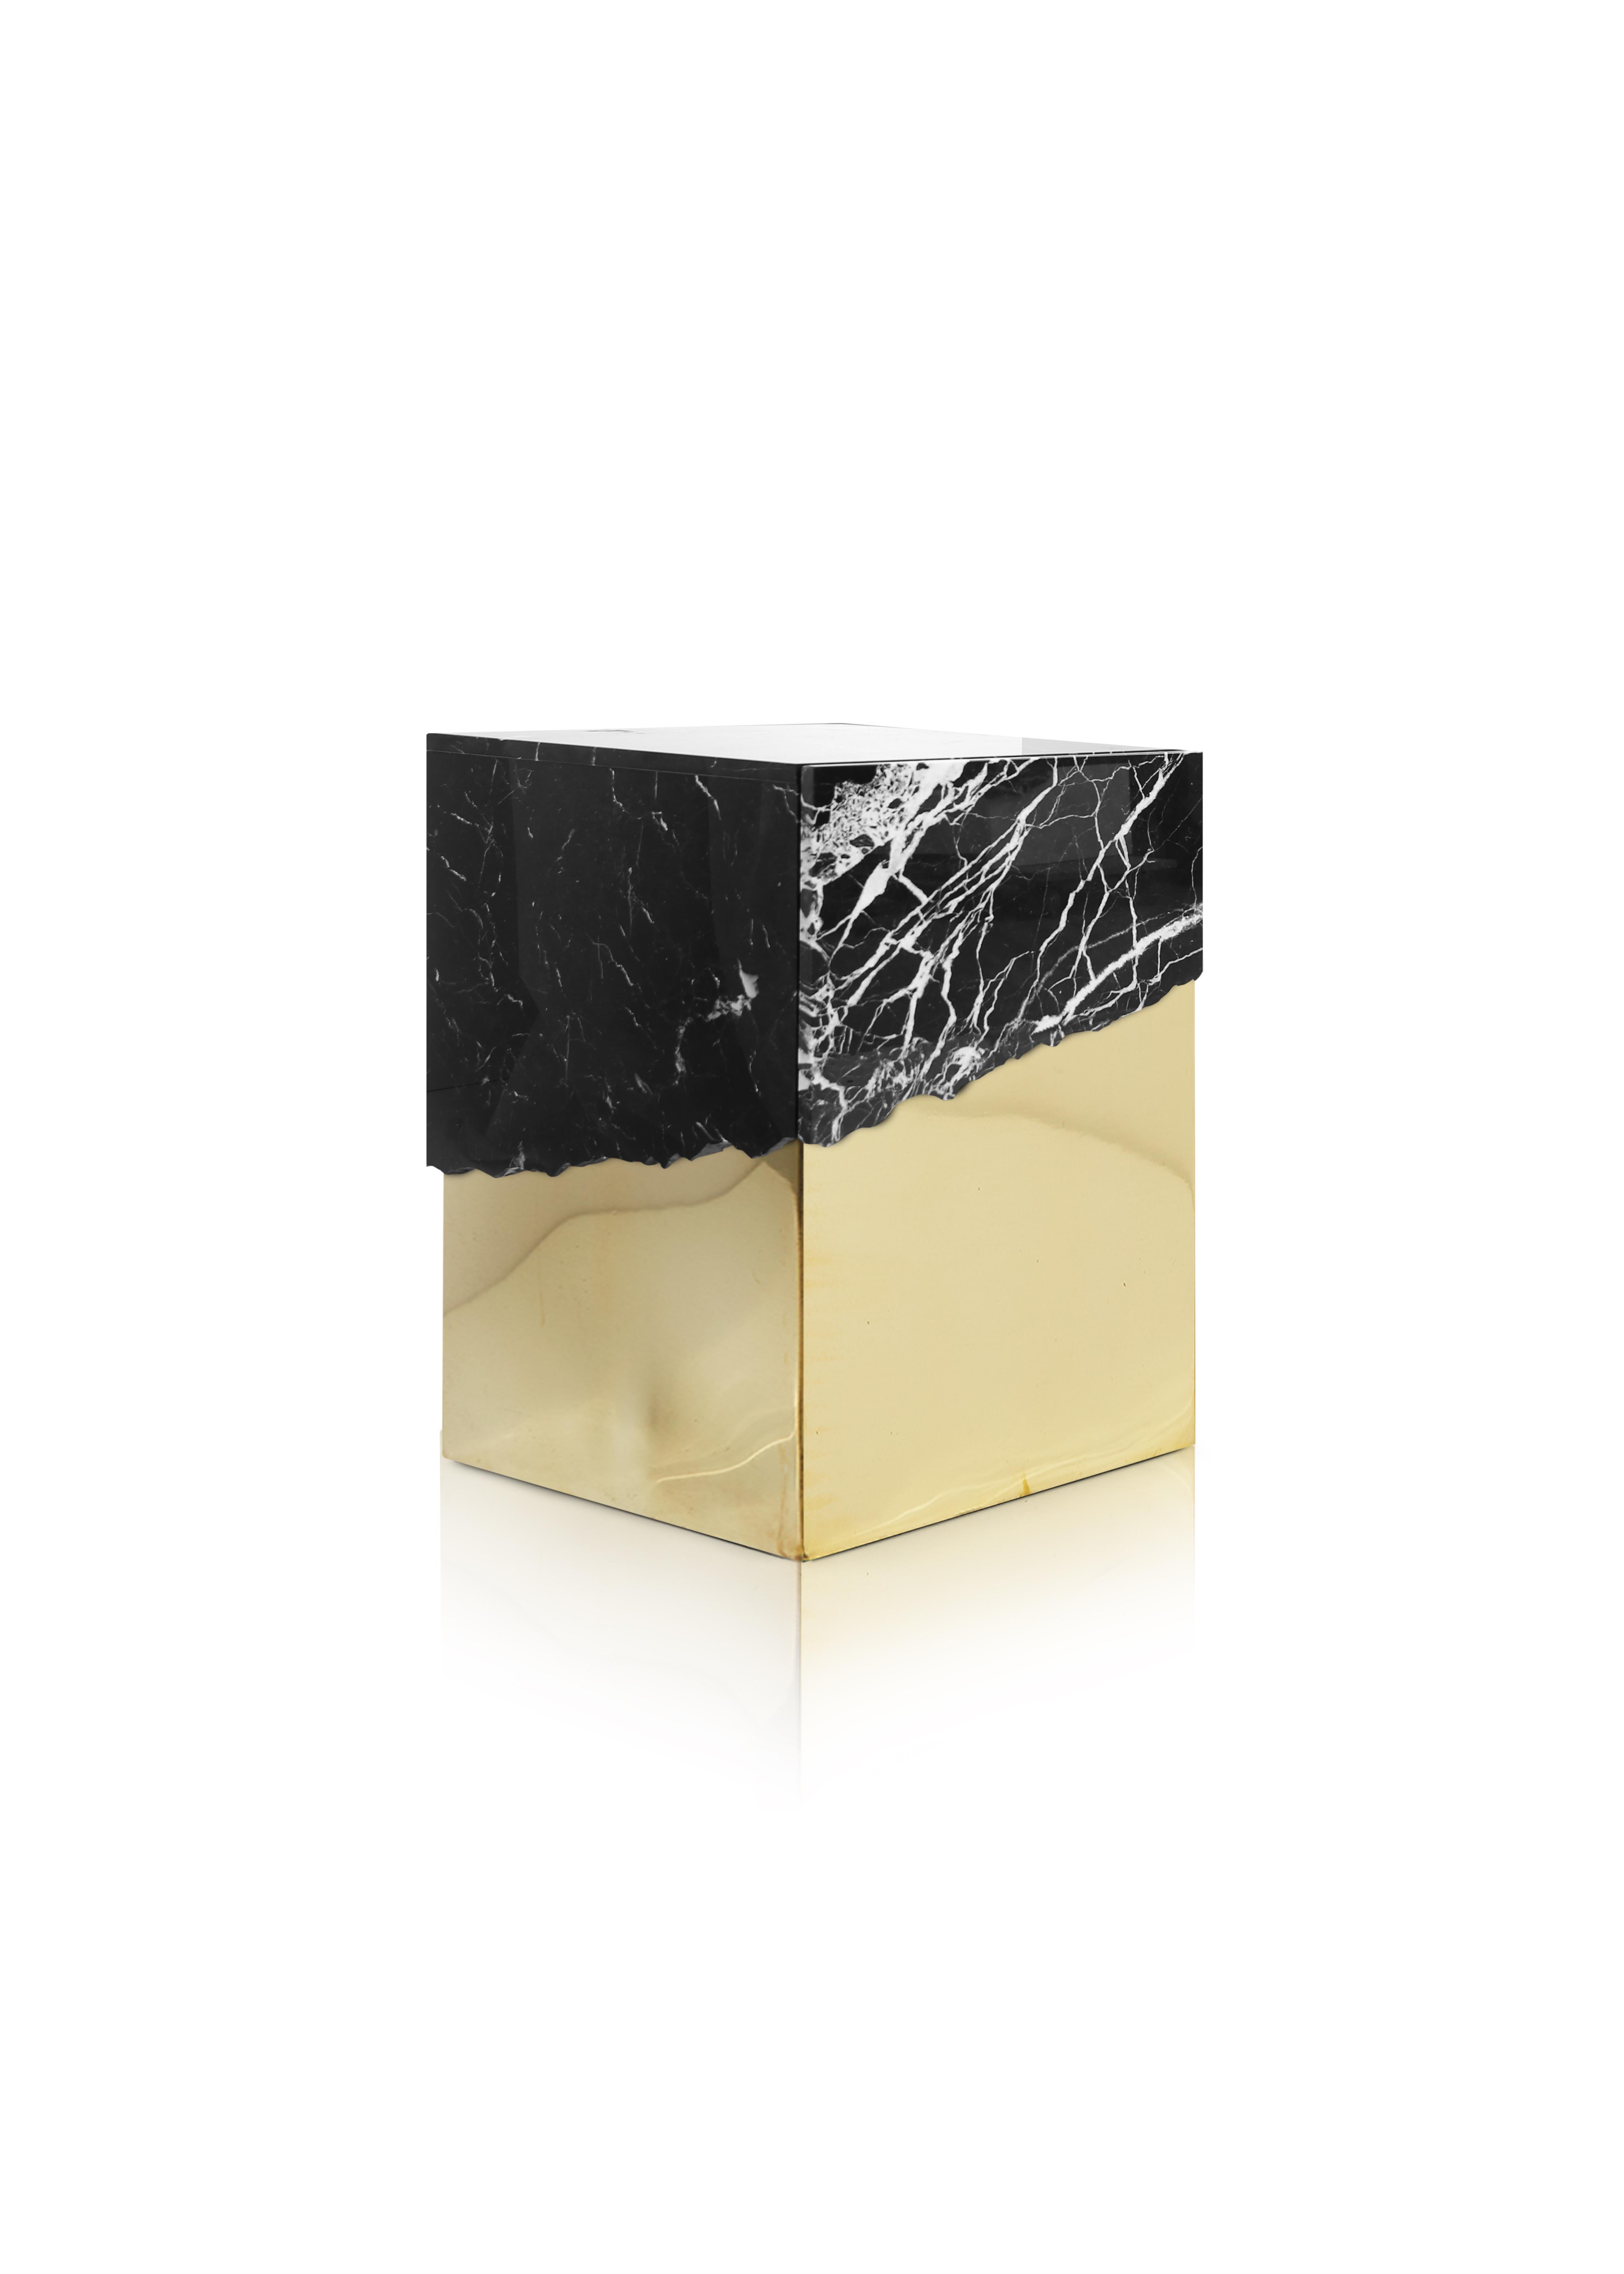 Our latest piece, the side table, is an elegantly designed work of art that is sure to make a bold statement in any room. The side table is crafted from a stunning combination of black marble and polished brass, creating a striking contrast of